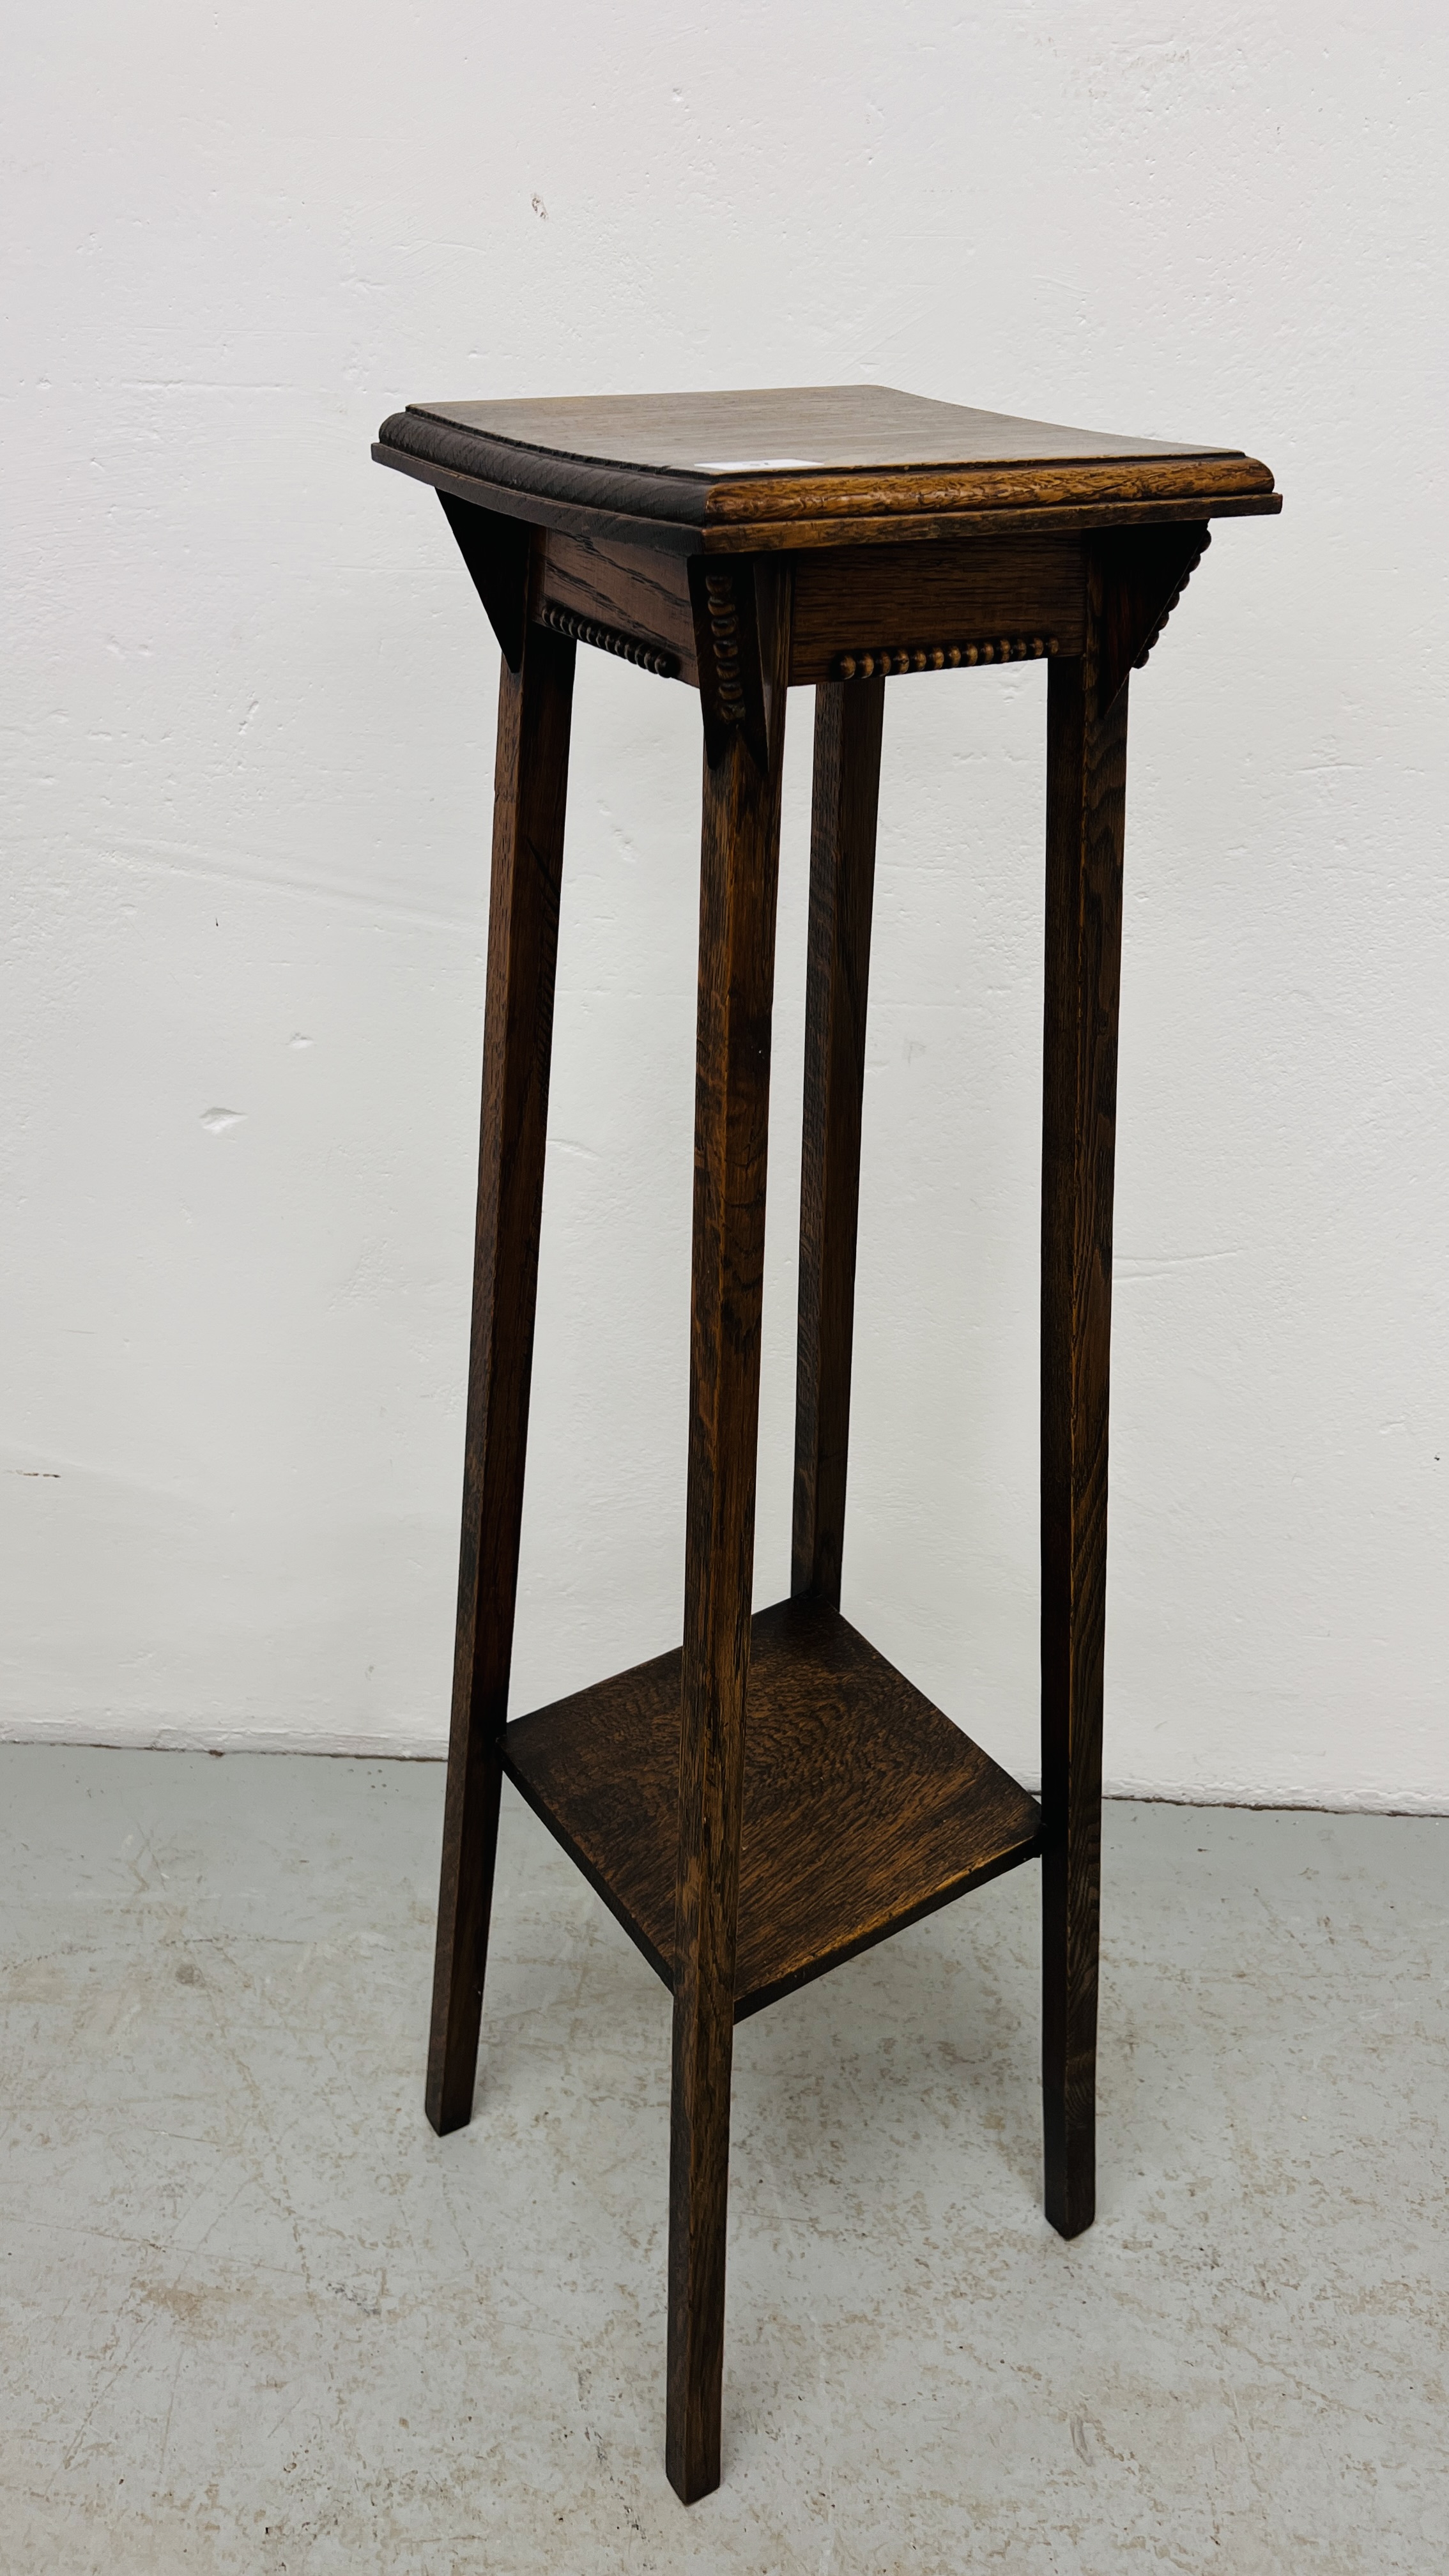 AN ARTS AND CRAFTS STYLE TWO TIER OAK PLANT STAND WIDTH 26CM. DEPTH 26CM. HEIGHT 102CM.